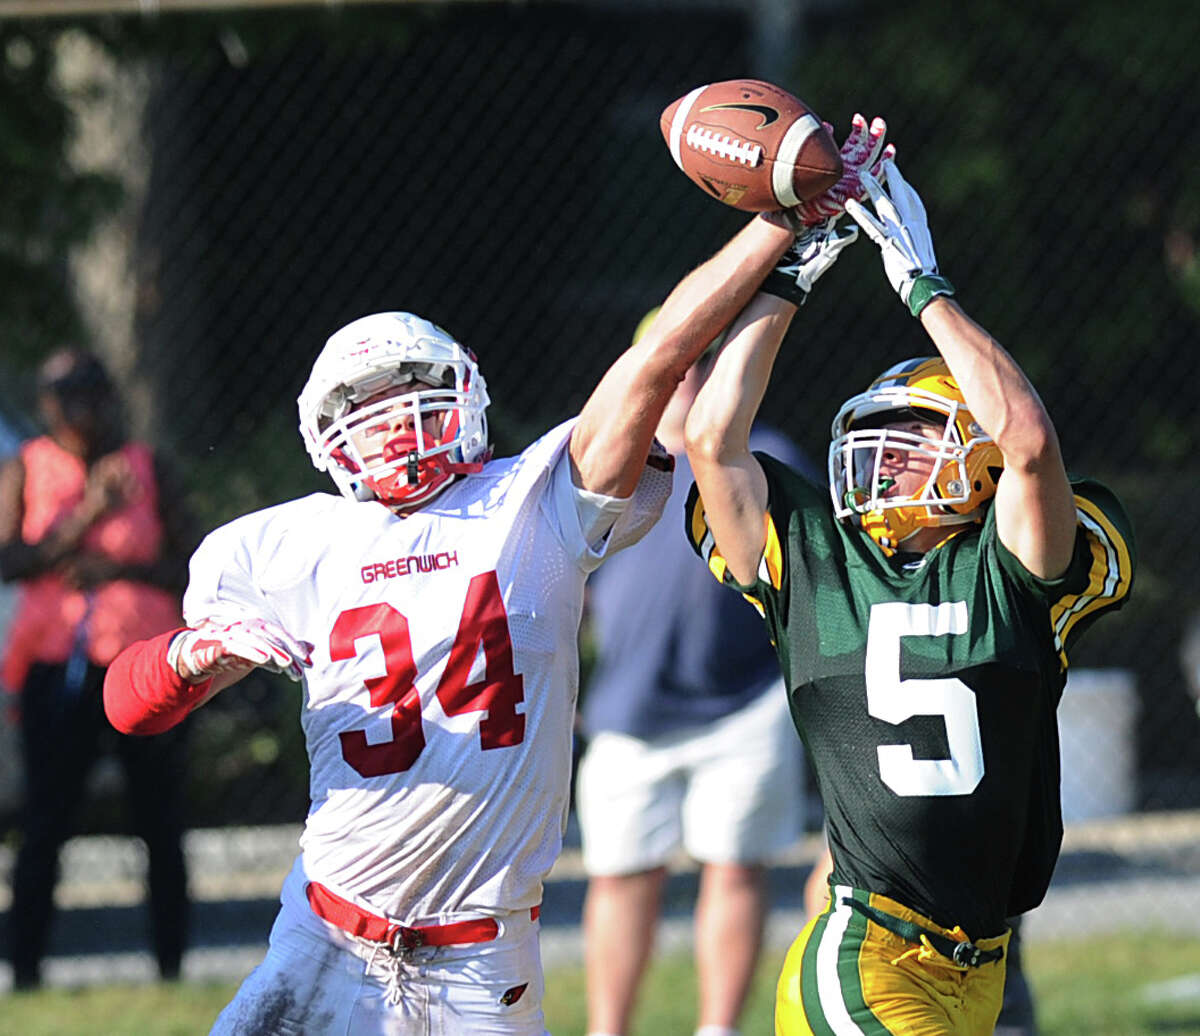 Greenwich defender Mike Gianesello (#34), left, breaks up a pass thrown to Trinity's Dominick Svrcek (#5), right, during the high school football game between Trinity Catholic High School and Greenwich High School at Trinity in Stamford, Conn., Friday, Sept. 18, 2015. Greenwich won the game, 42-38.